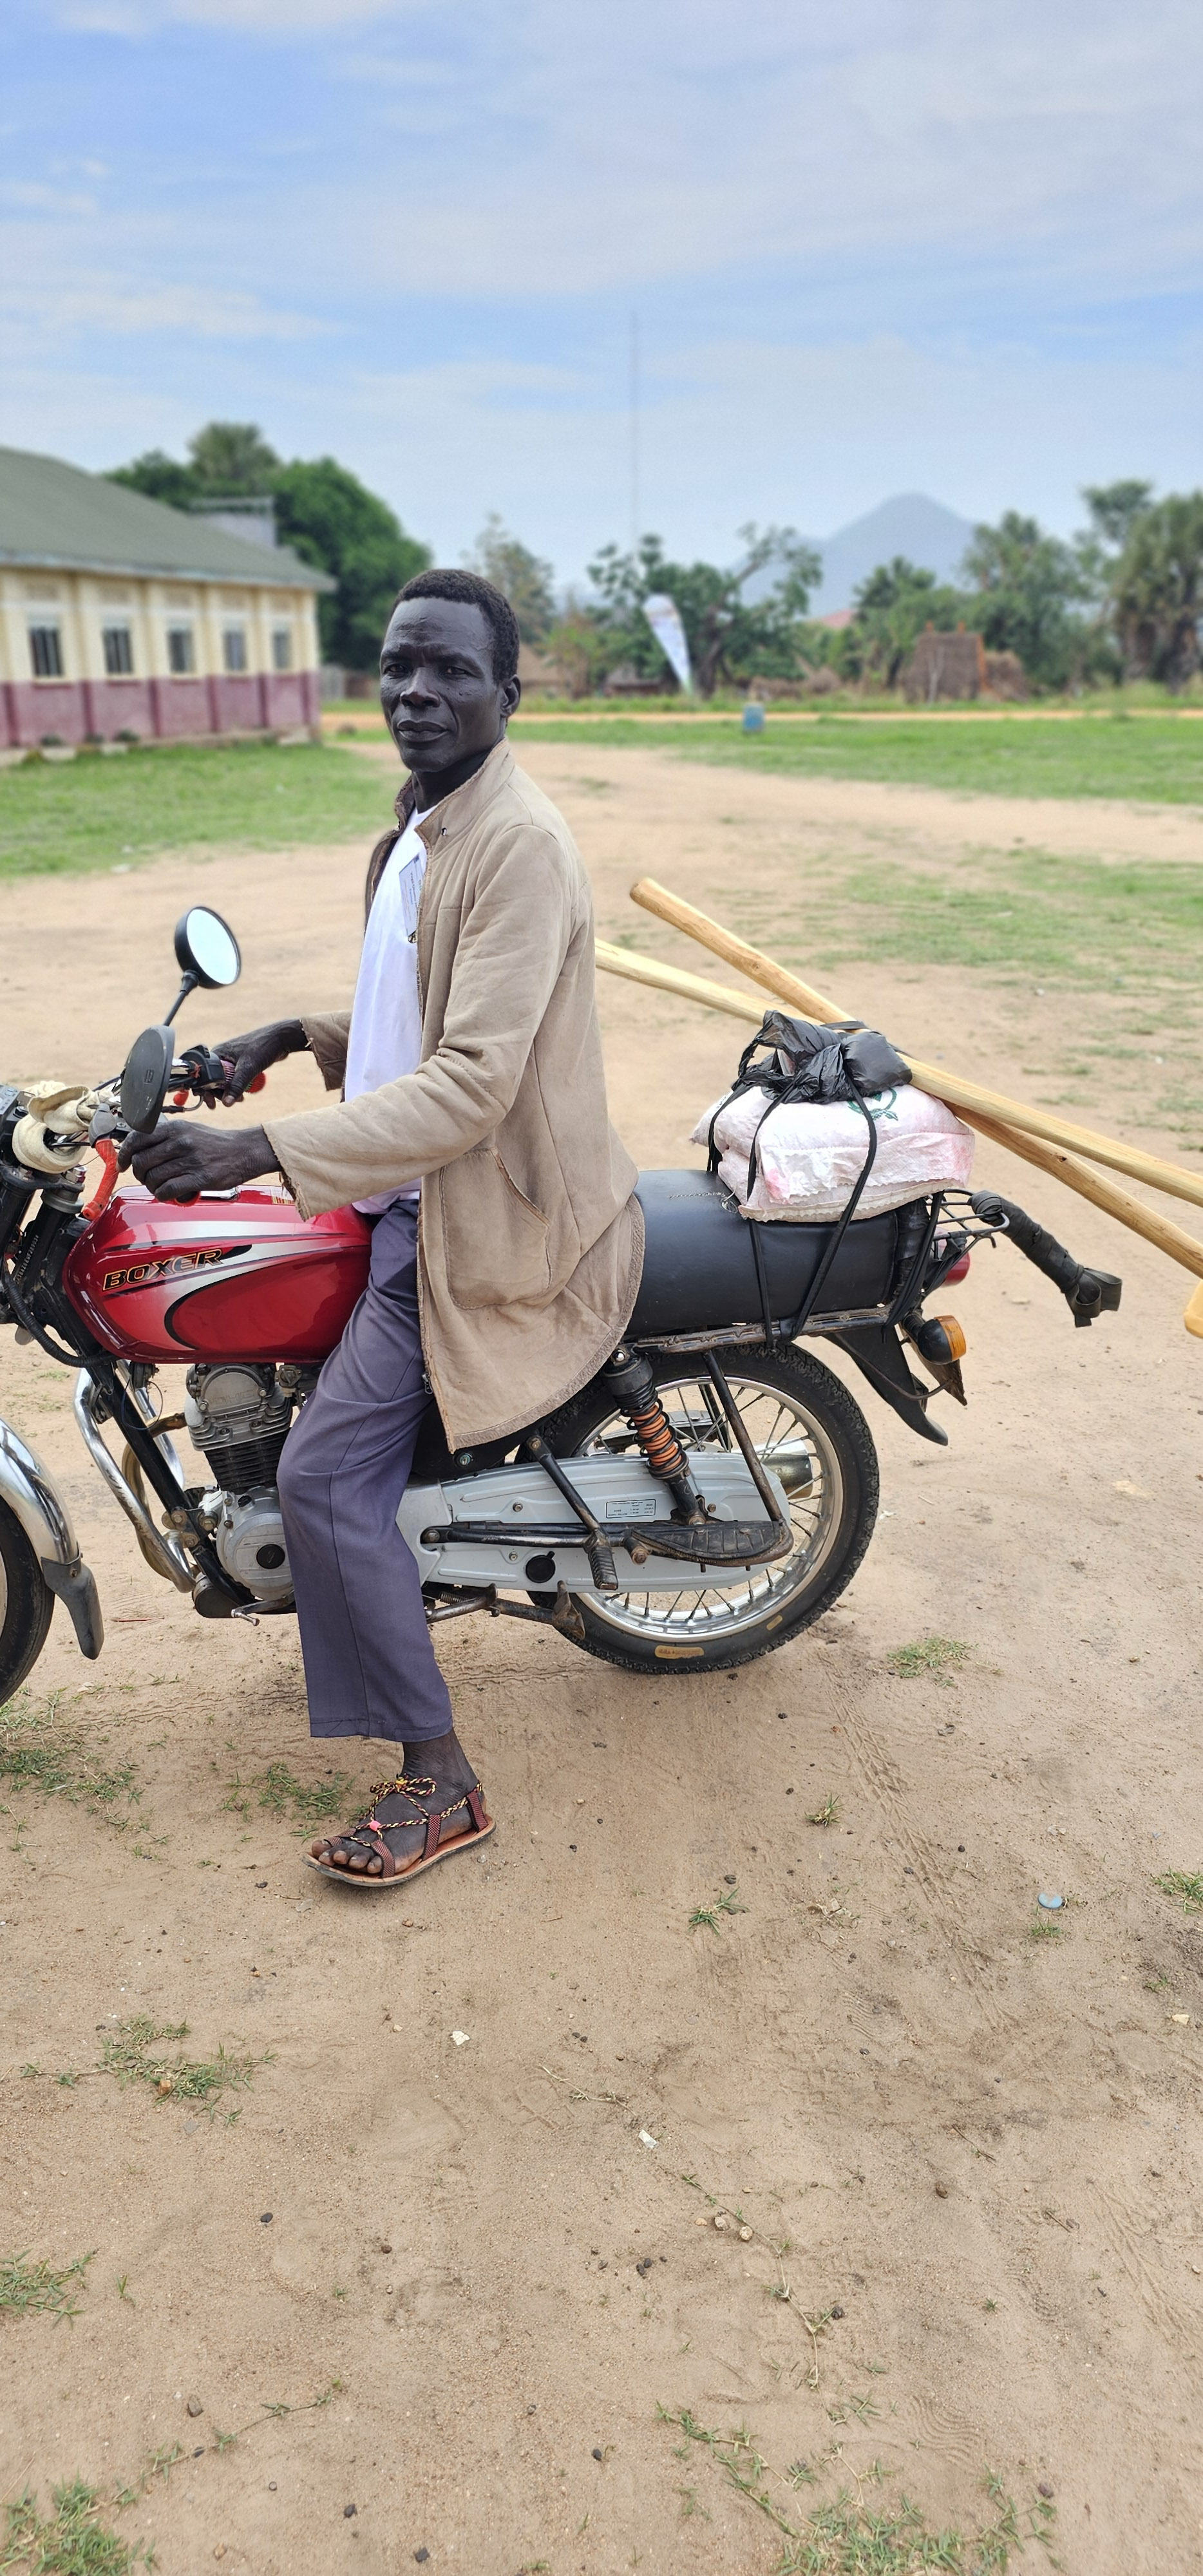 A South Sudanese producer carries seeds on his motorcycle after visiting a local agricultural input shop.